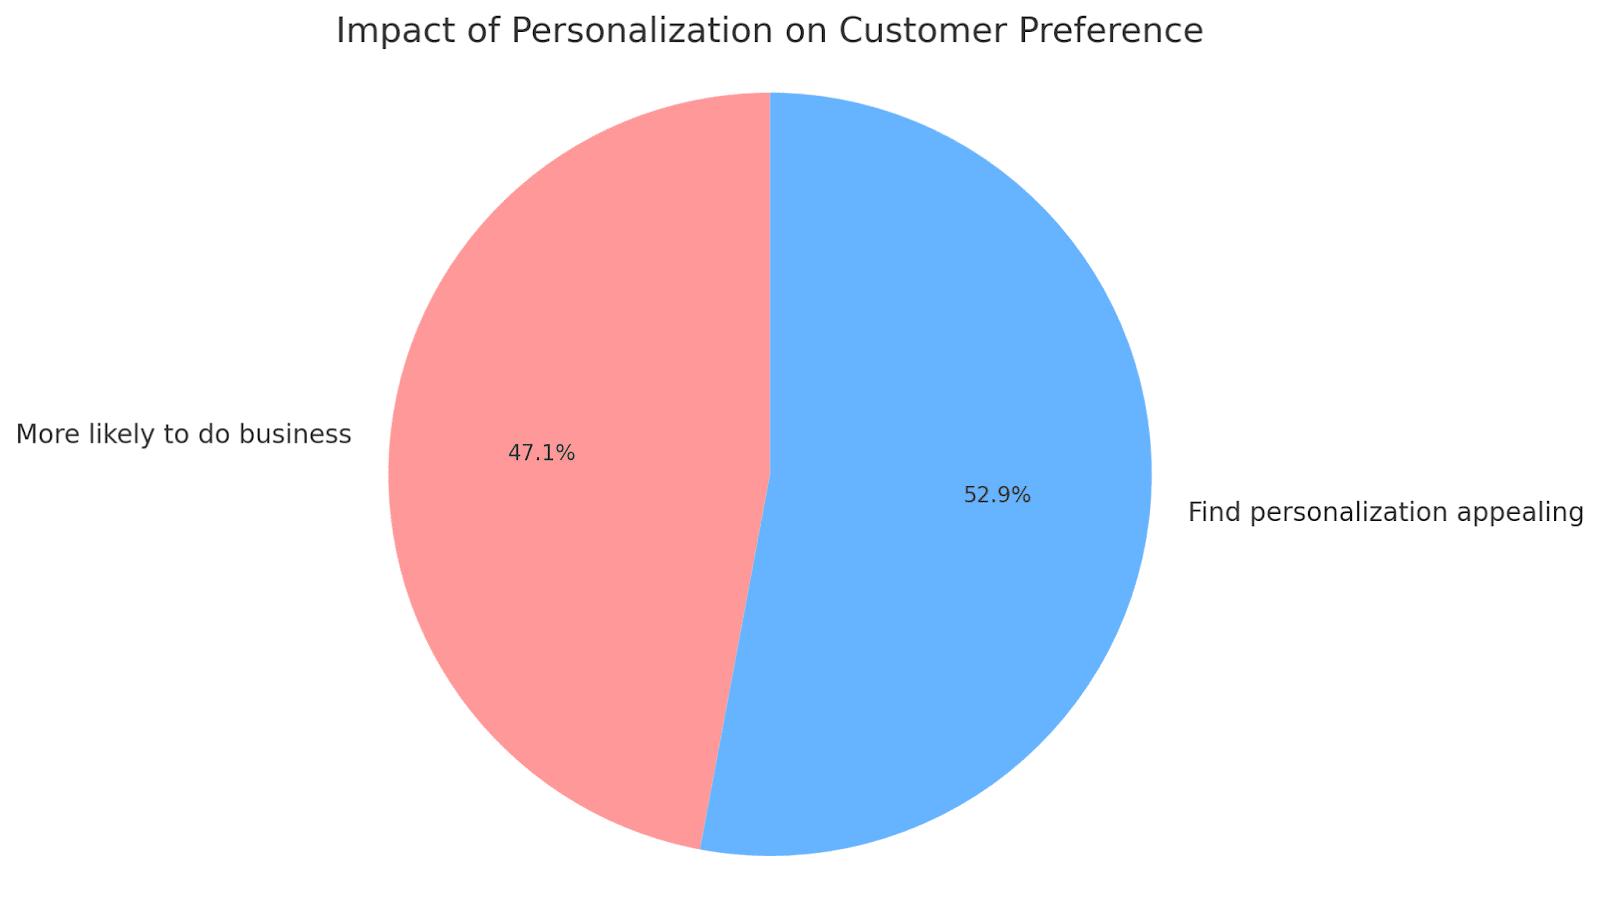 Impact of Personalization on Customer Preference